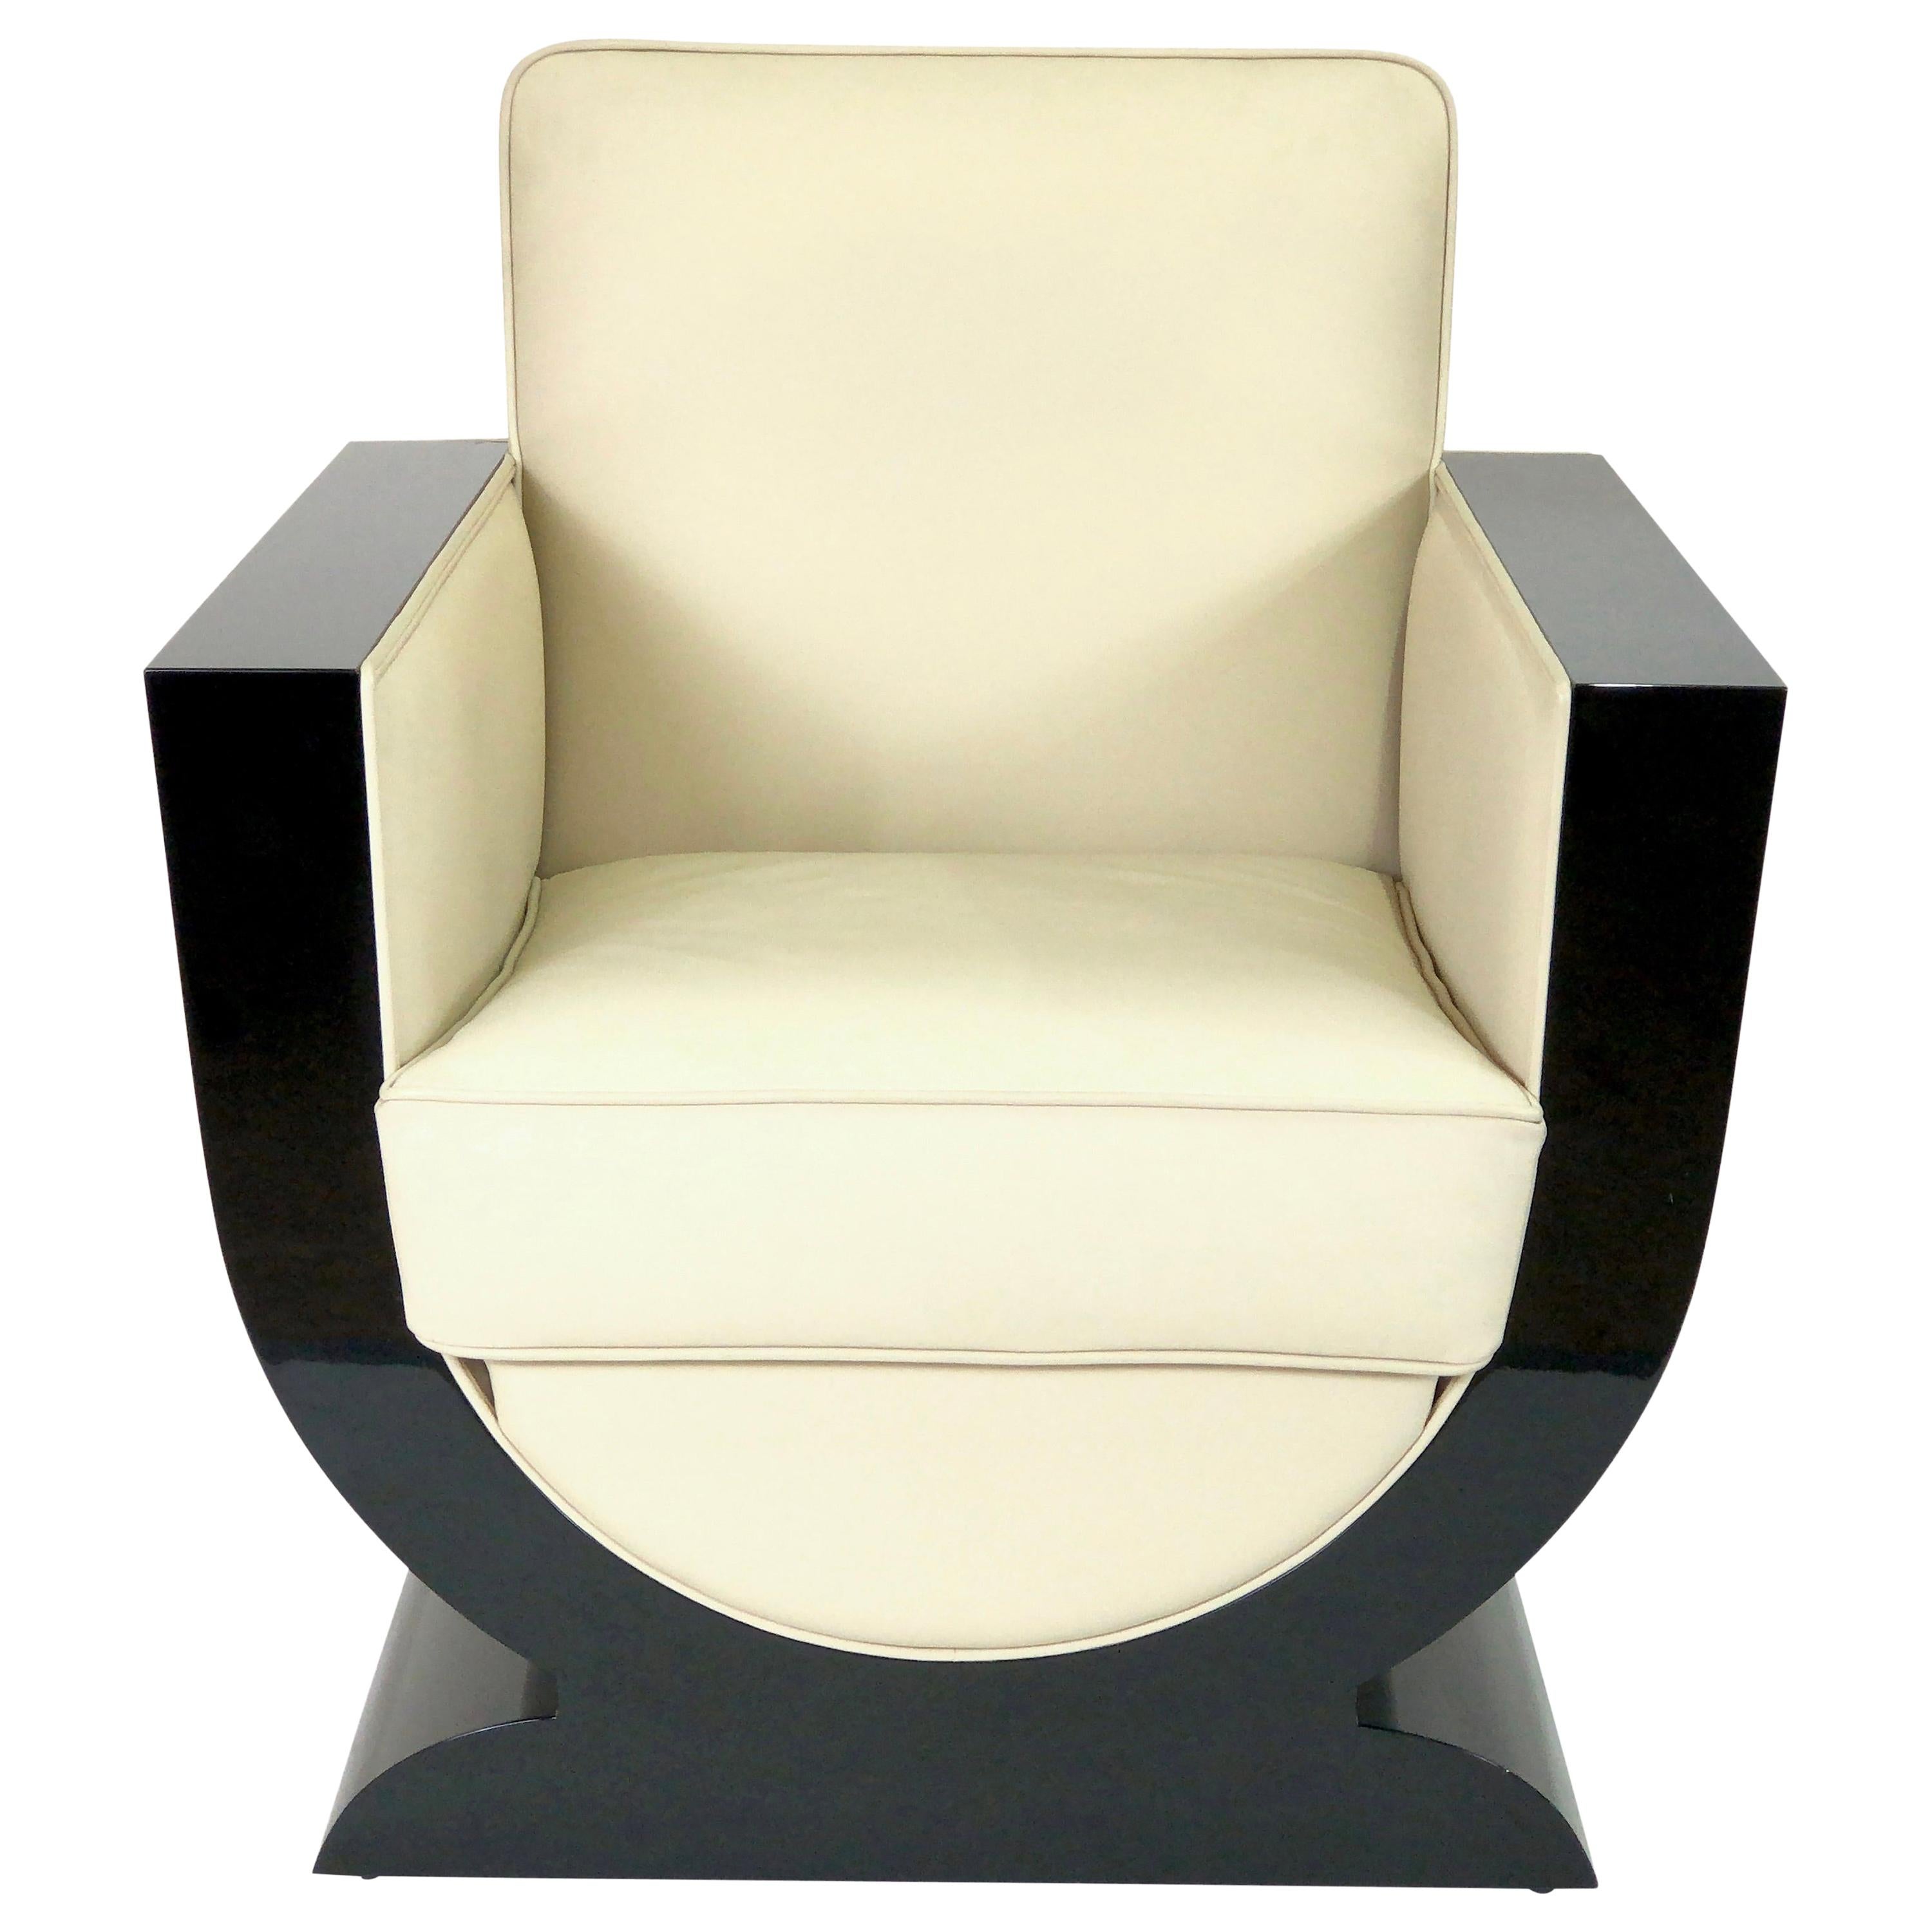 U-Shaped Black and White Art Deco Style Club Chair with Black Piano Lacquer For Sale